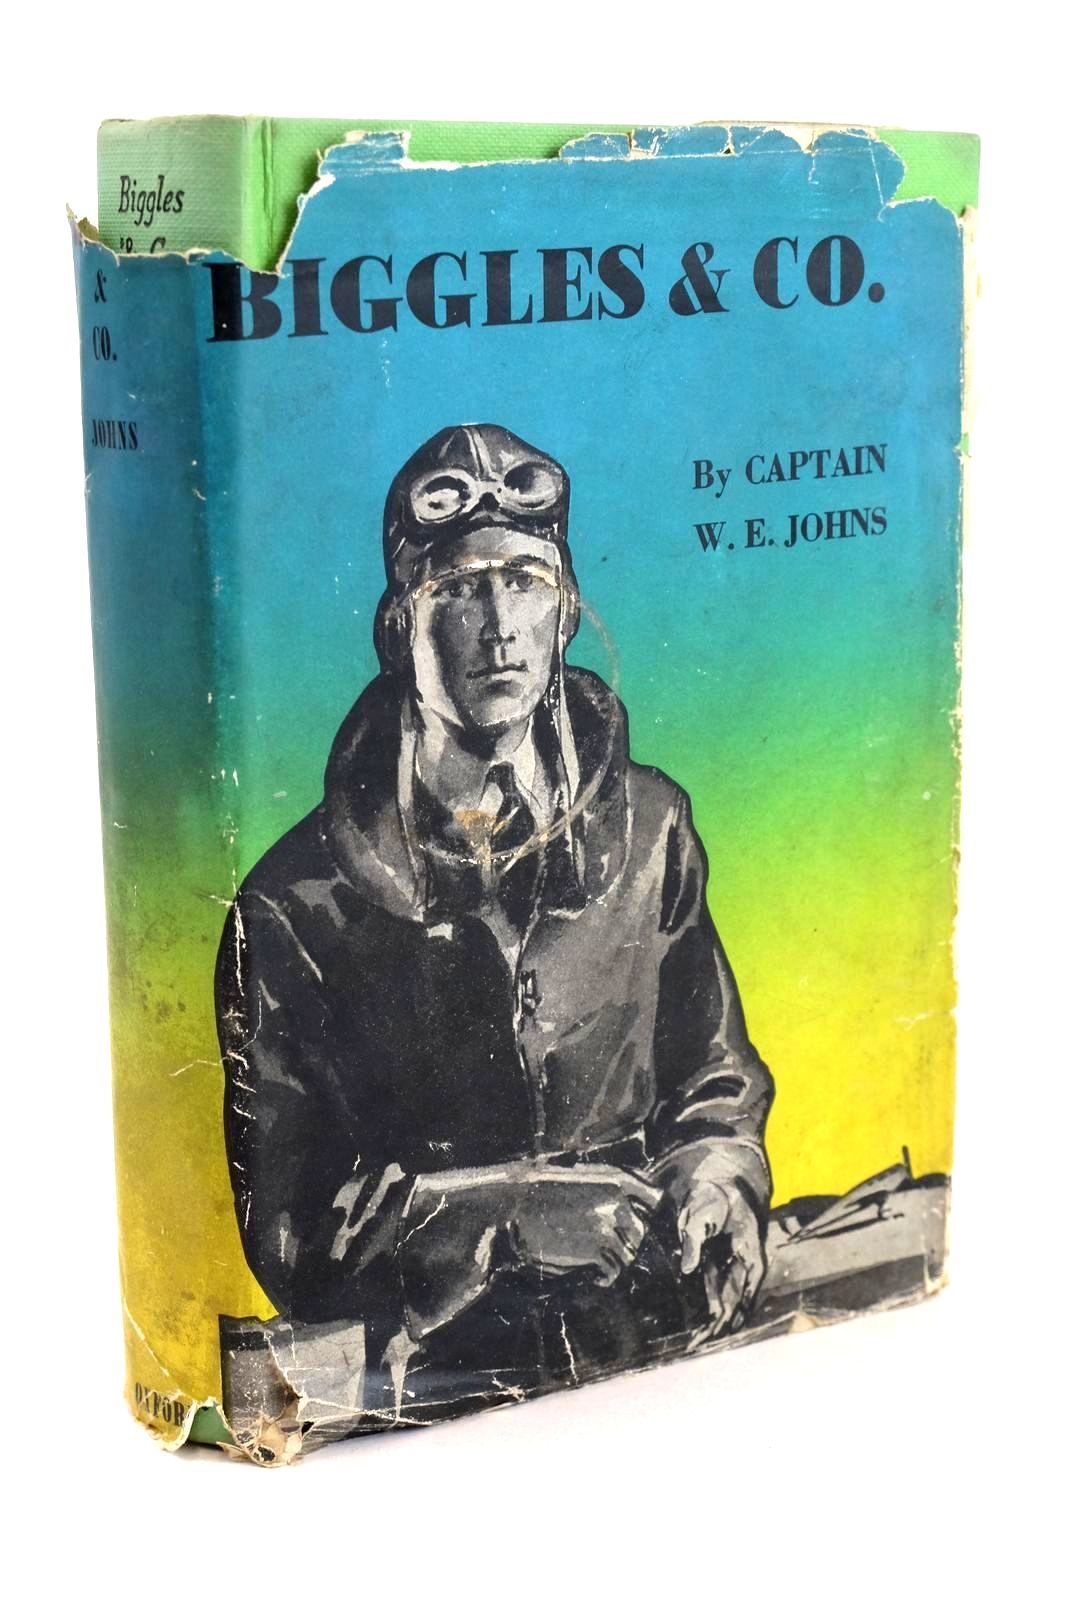 Photo of BIGGLES & CO.- Stock Number: 1326488